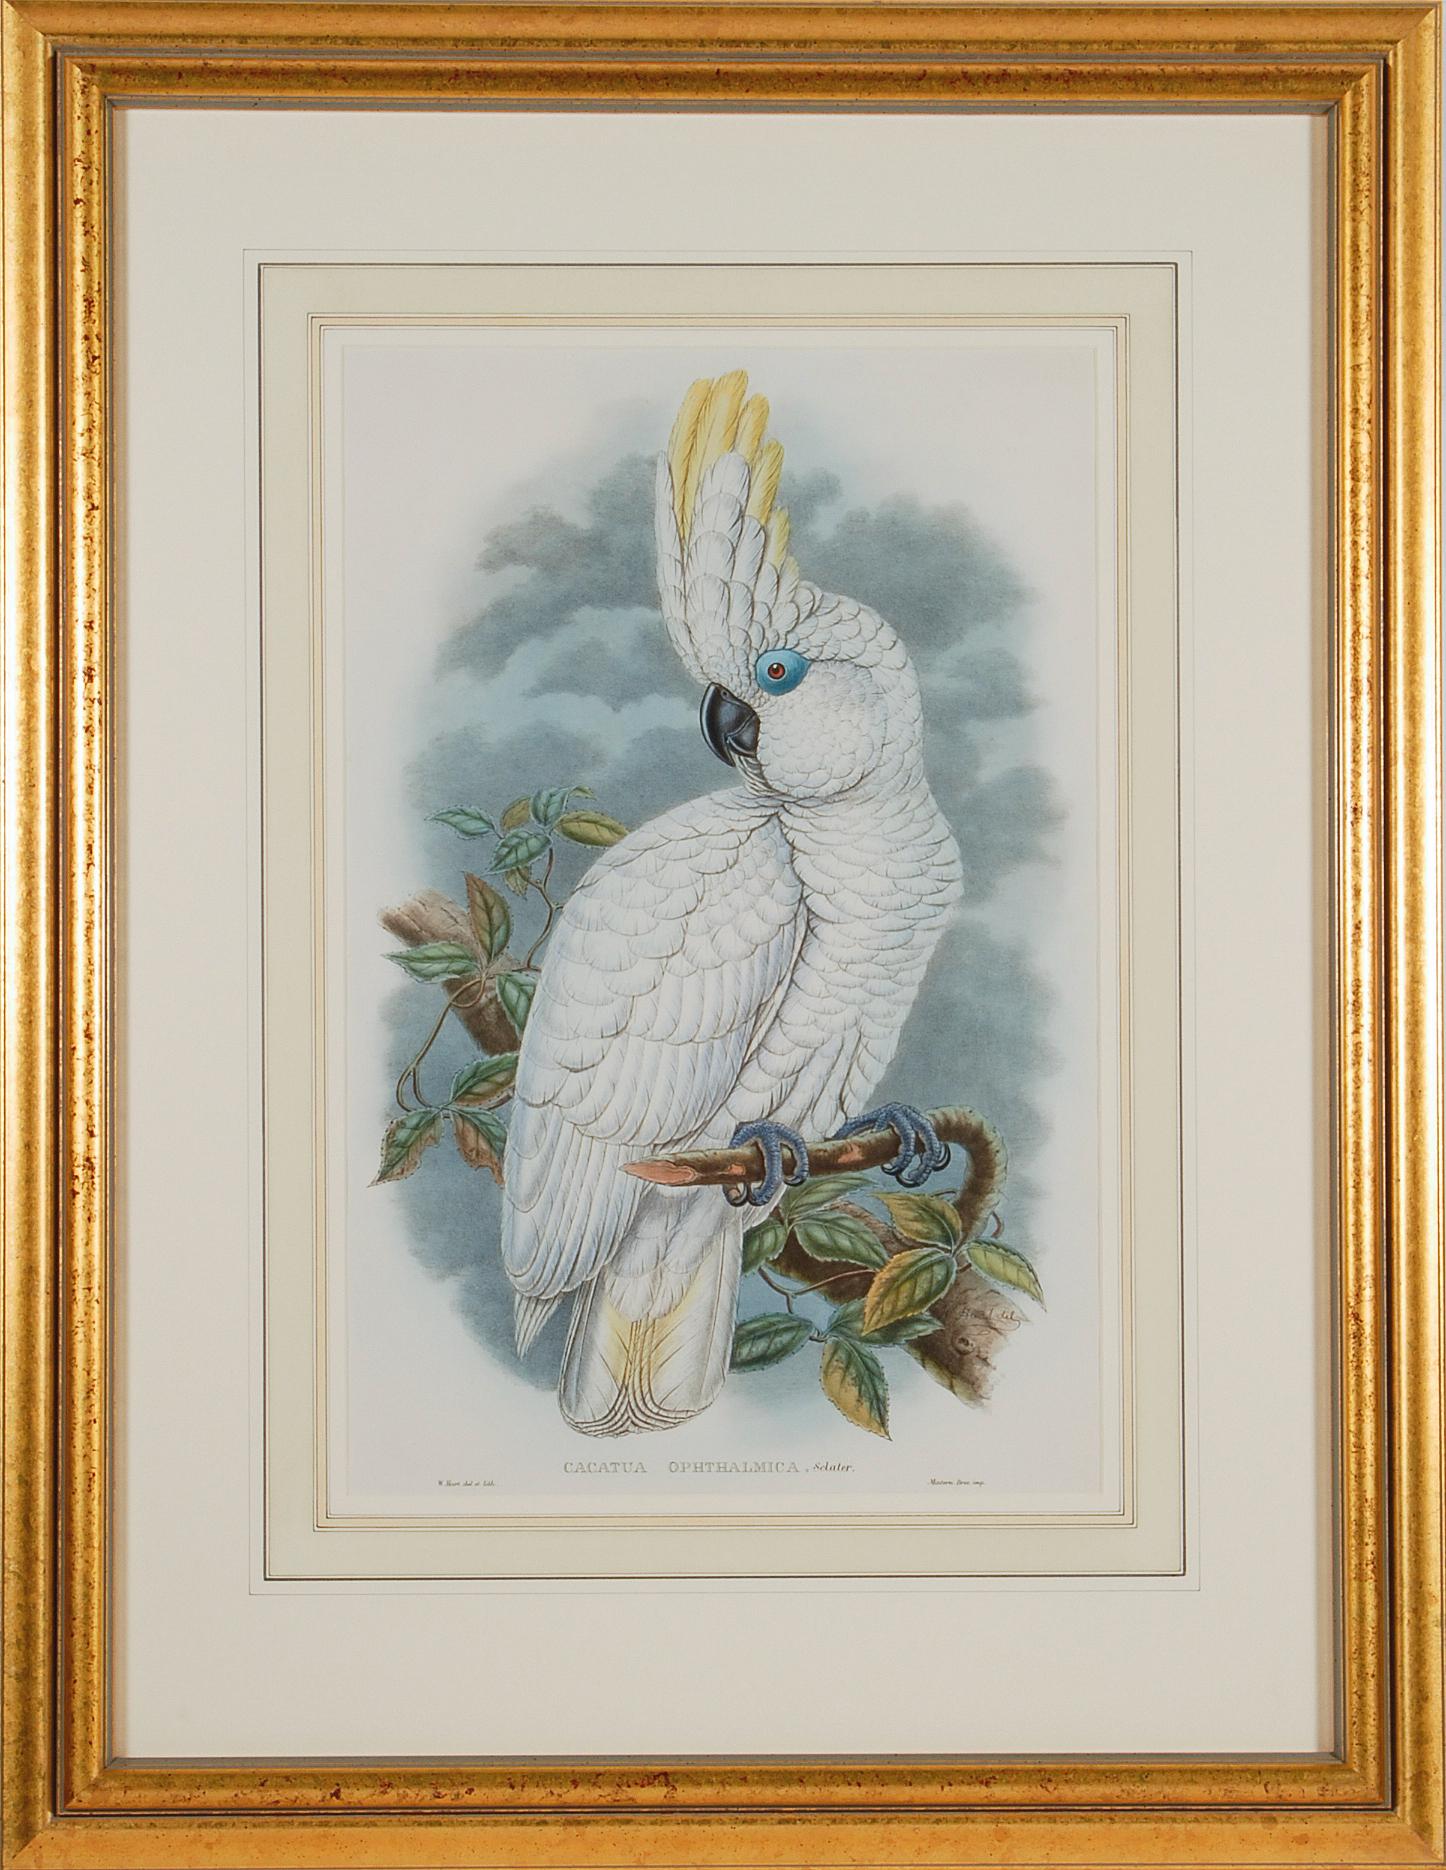 John Gould and Henry Constantine Richter Animal Print - Blue-eyed Cockatoo: A Framed Original 19th C. Hand-colored Lithograph by Gould